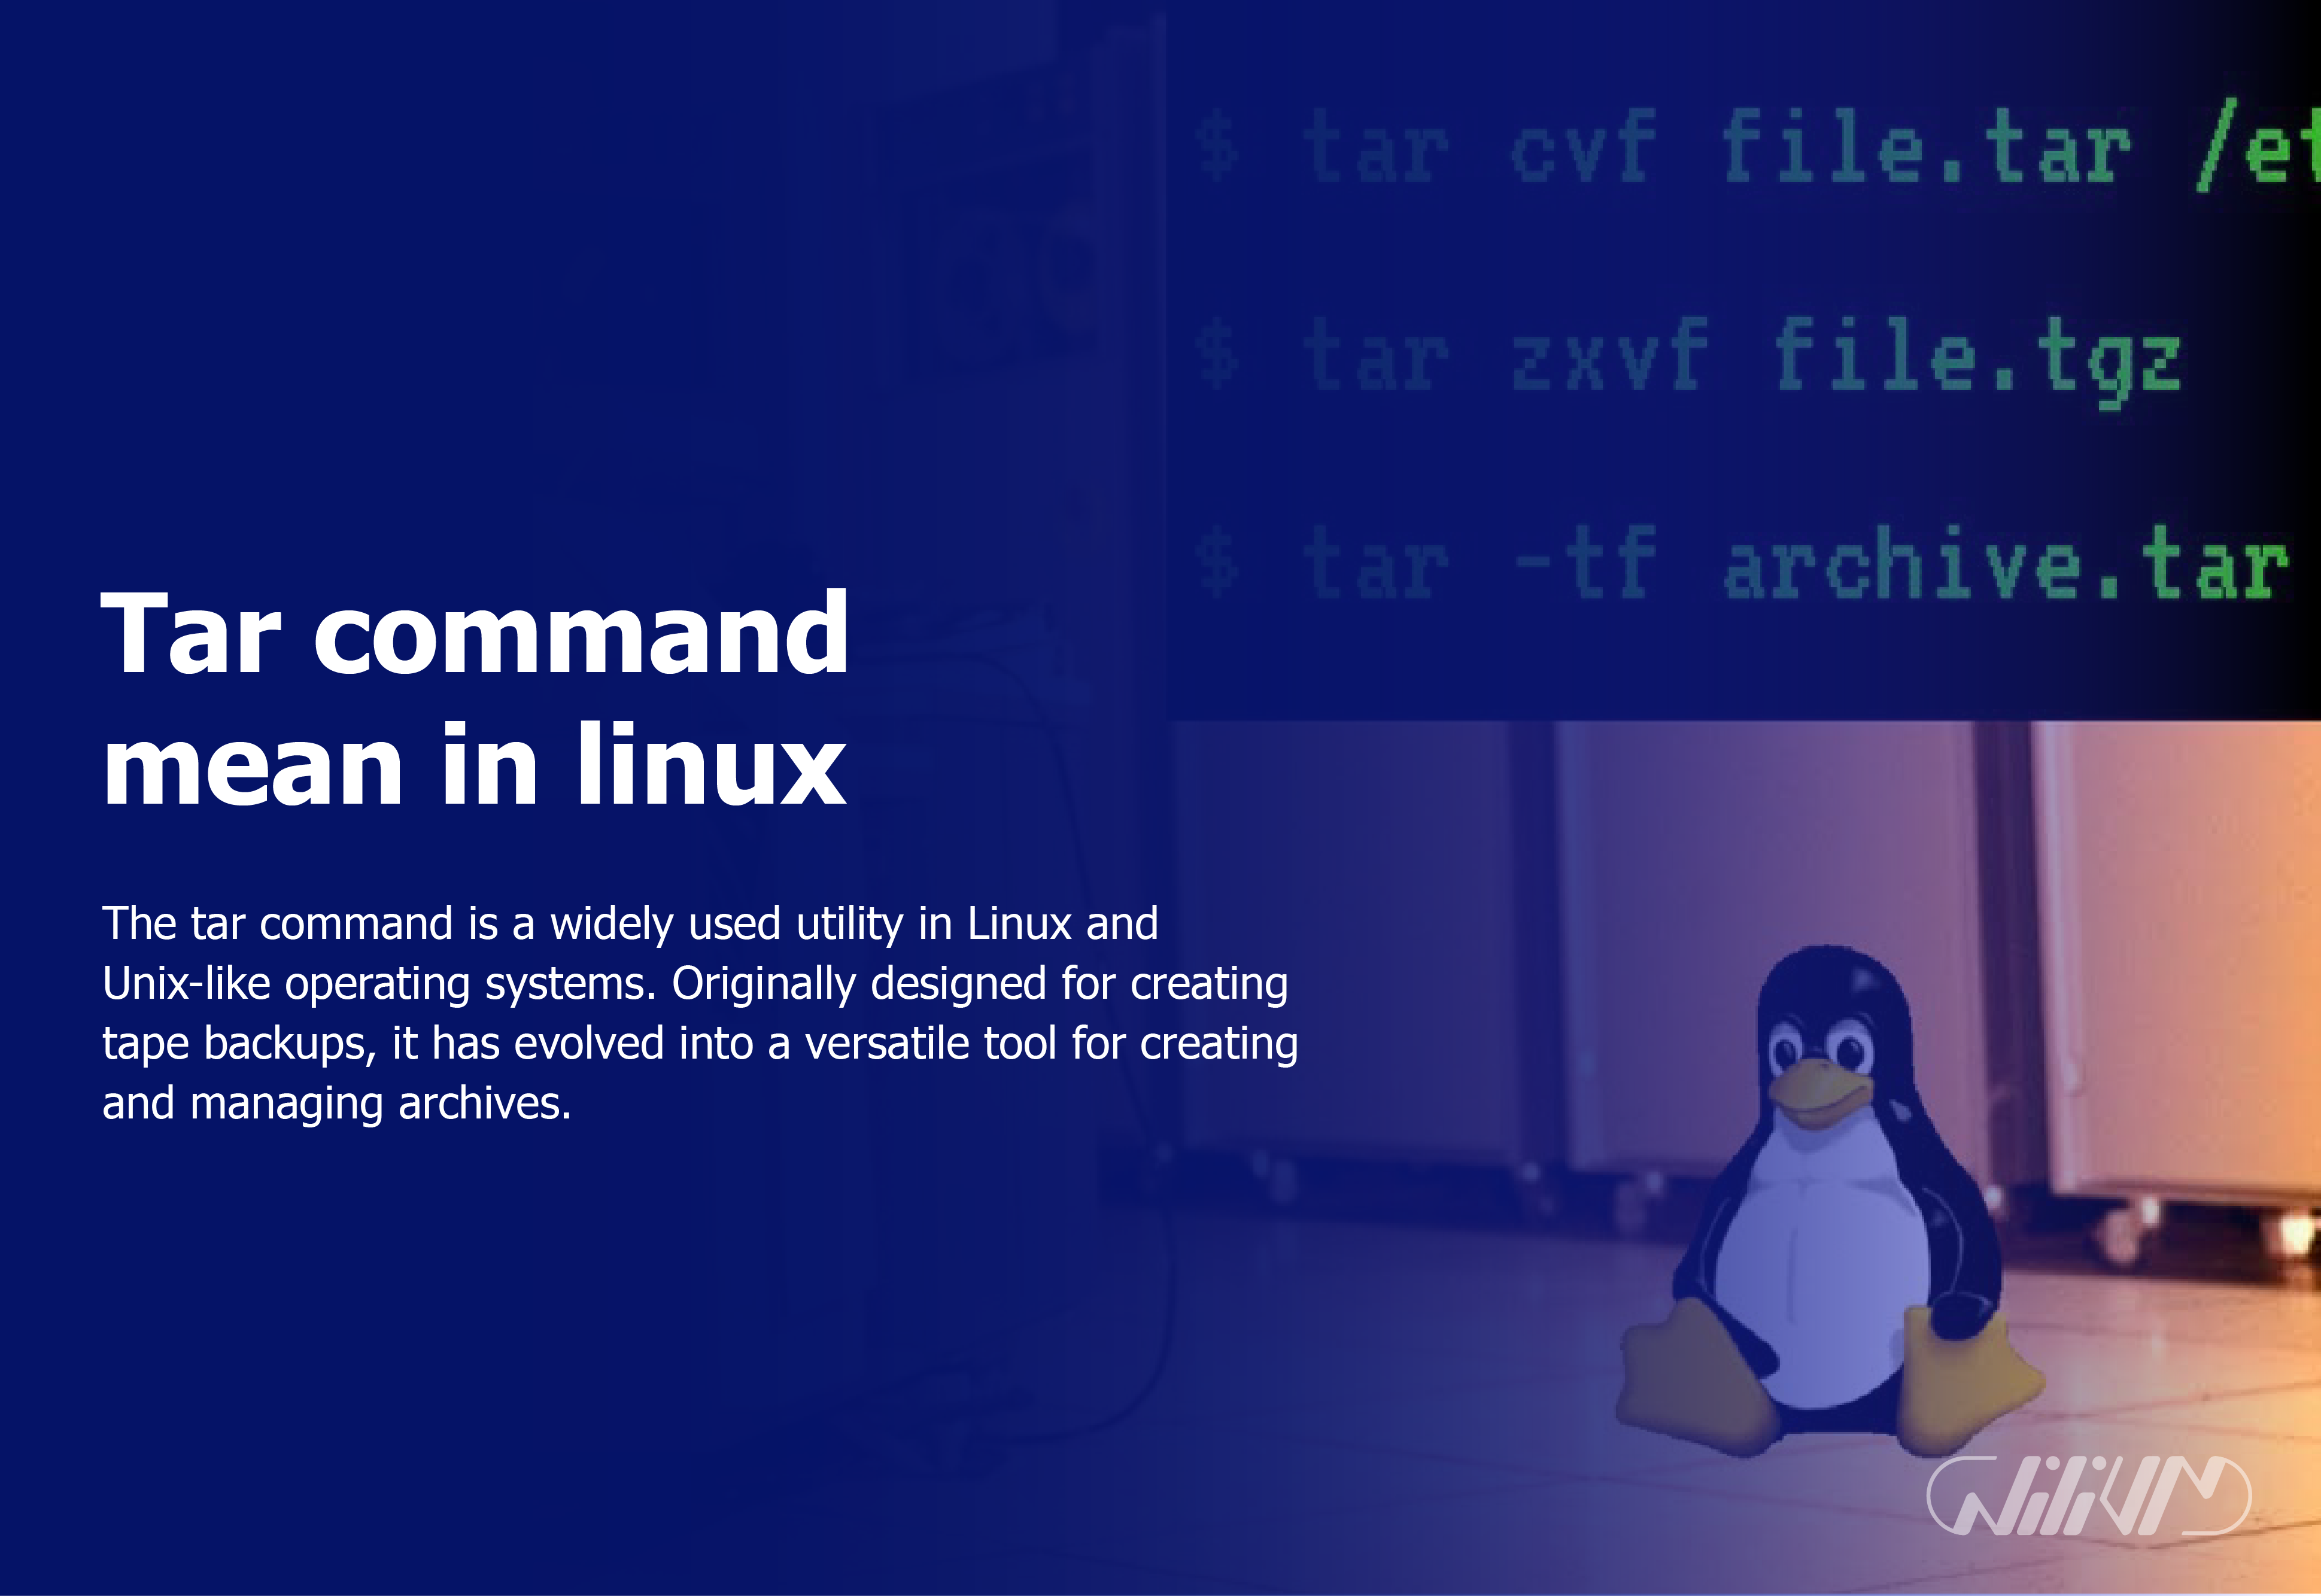 Tar command mean in linux